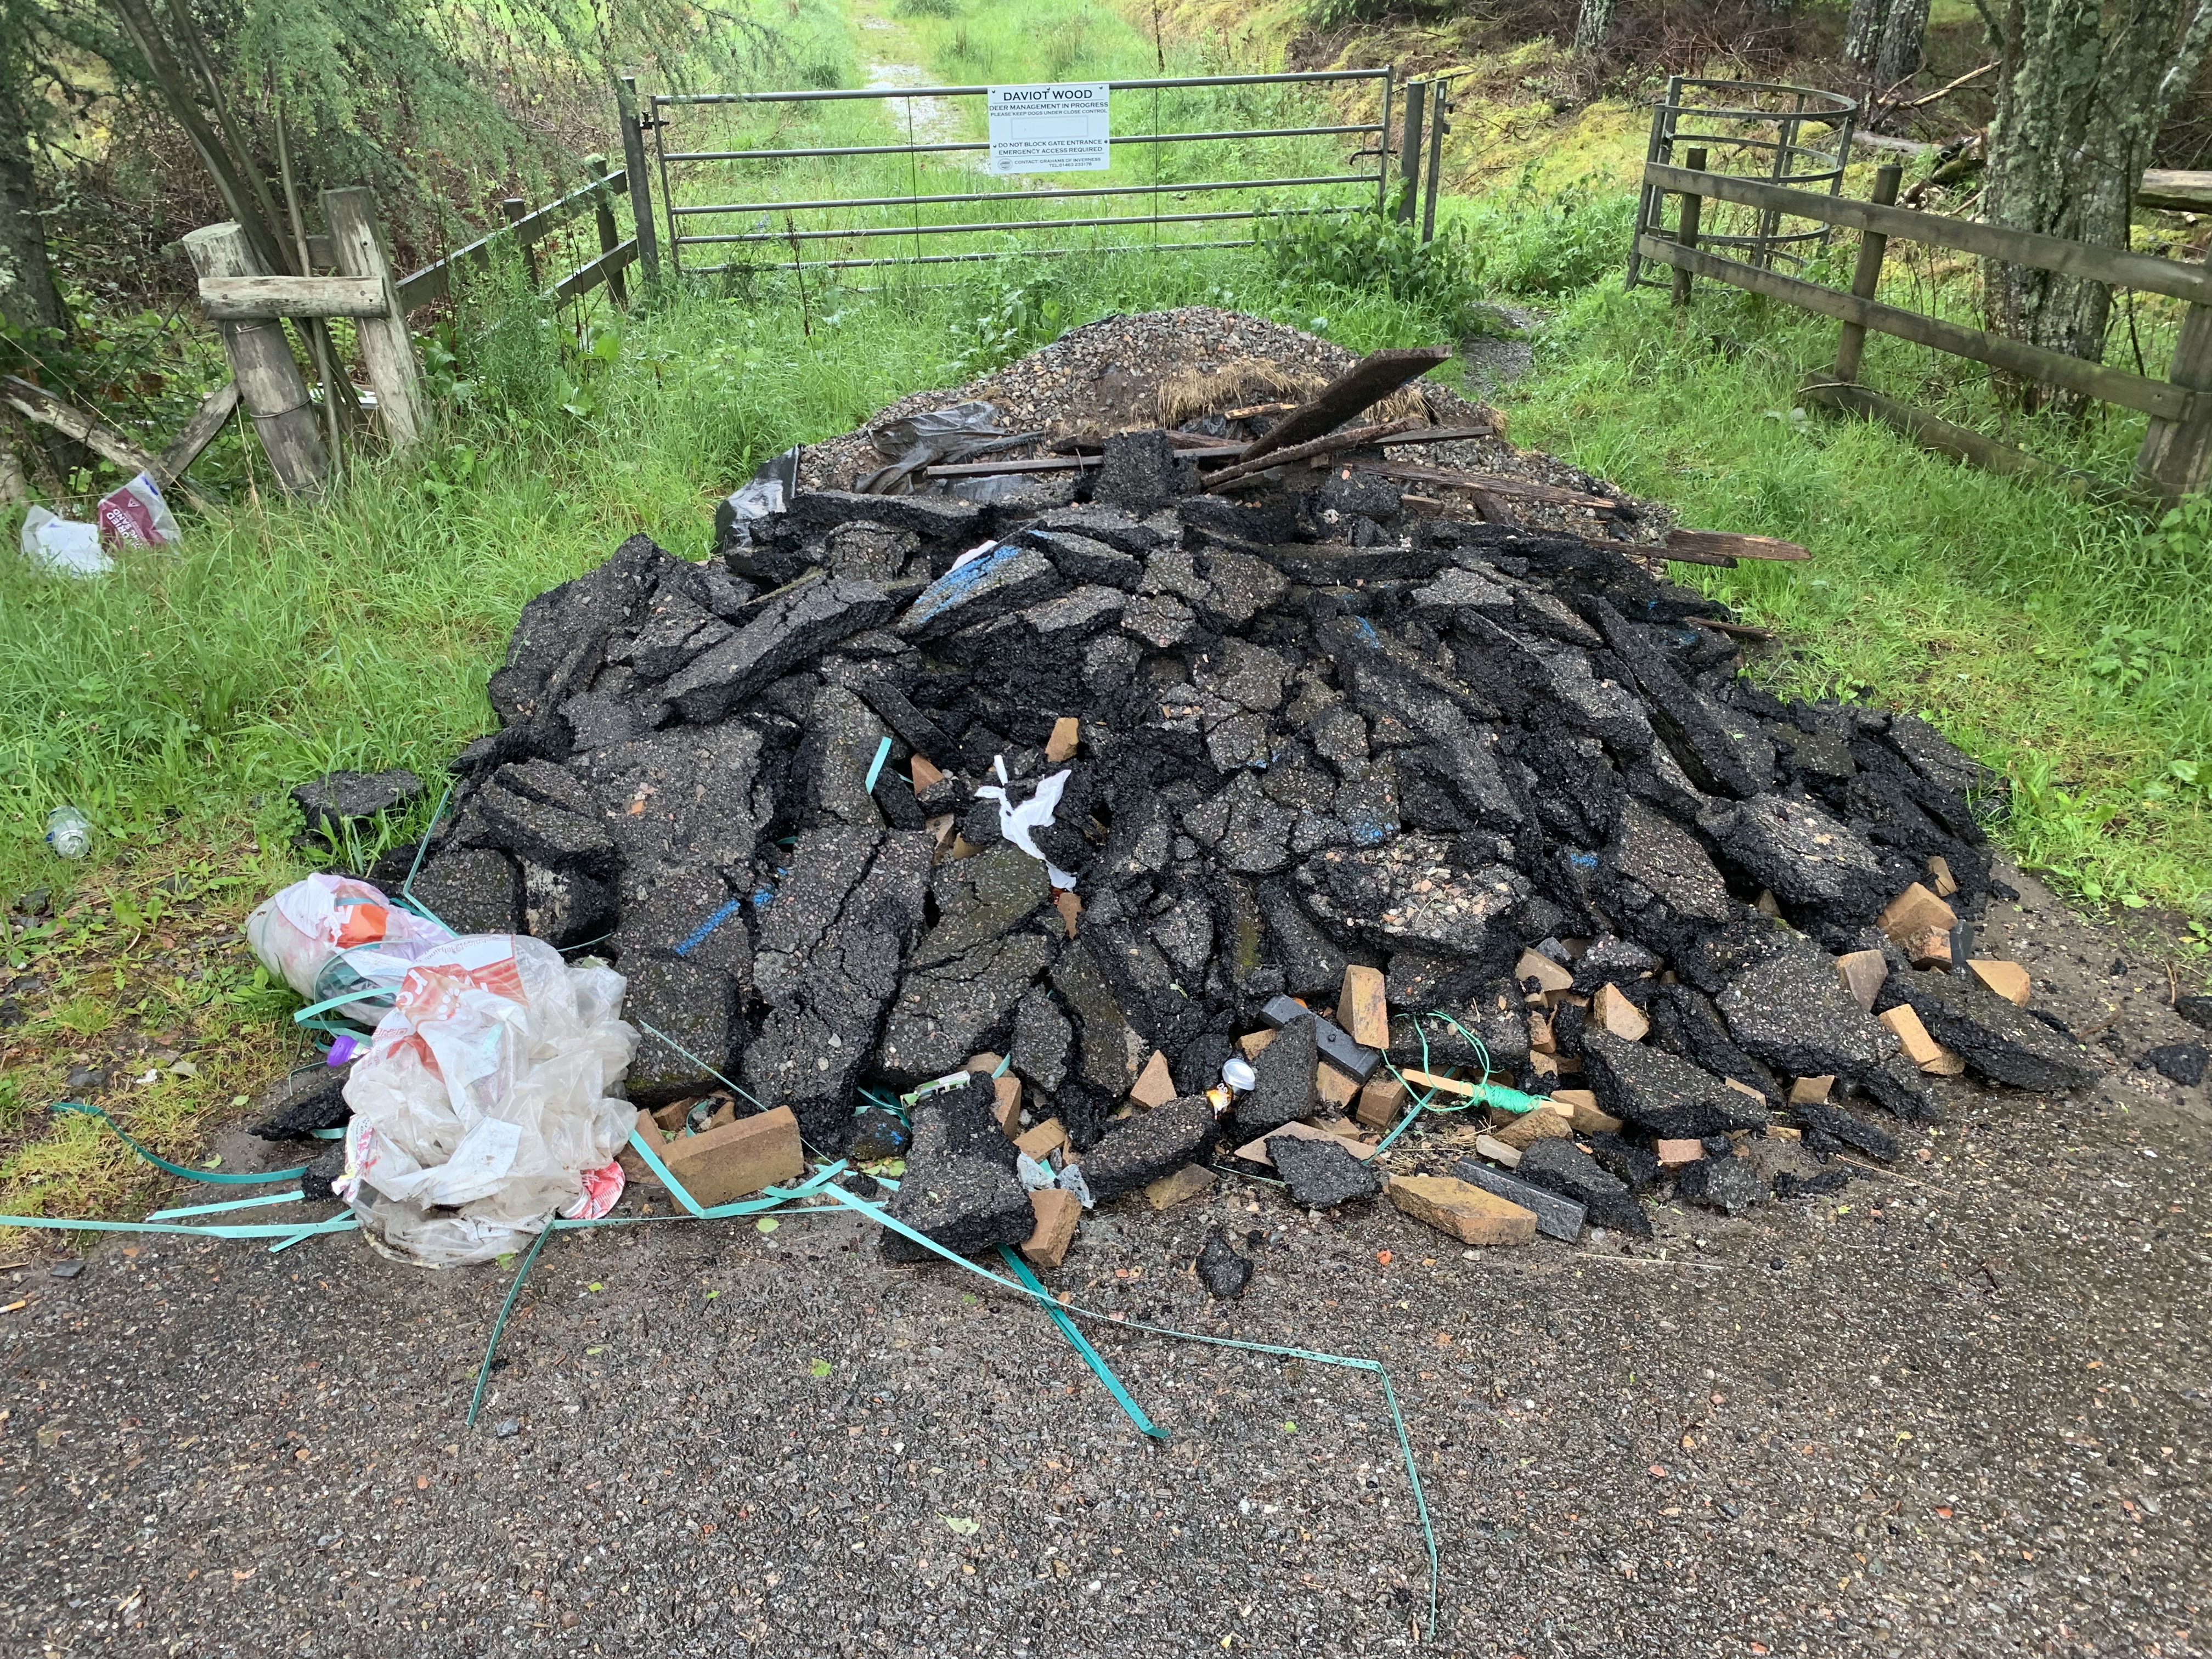 Rubbish dumped in lay-by on A9.